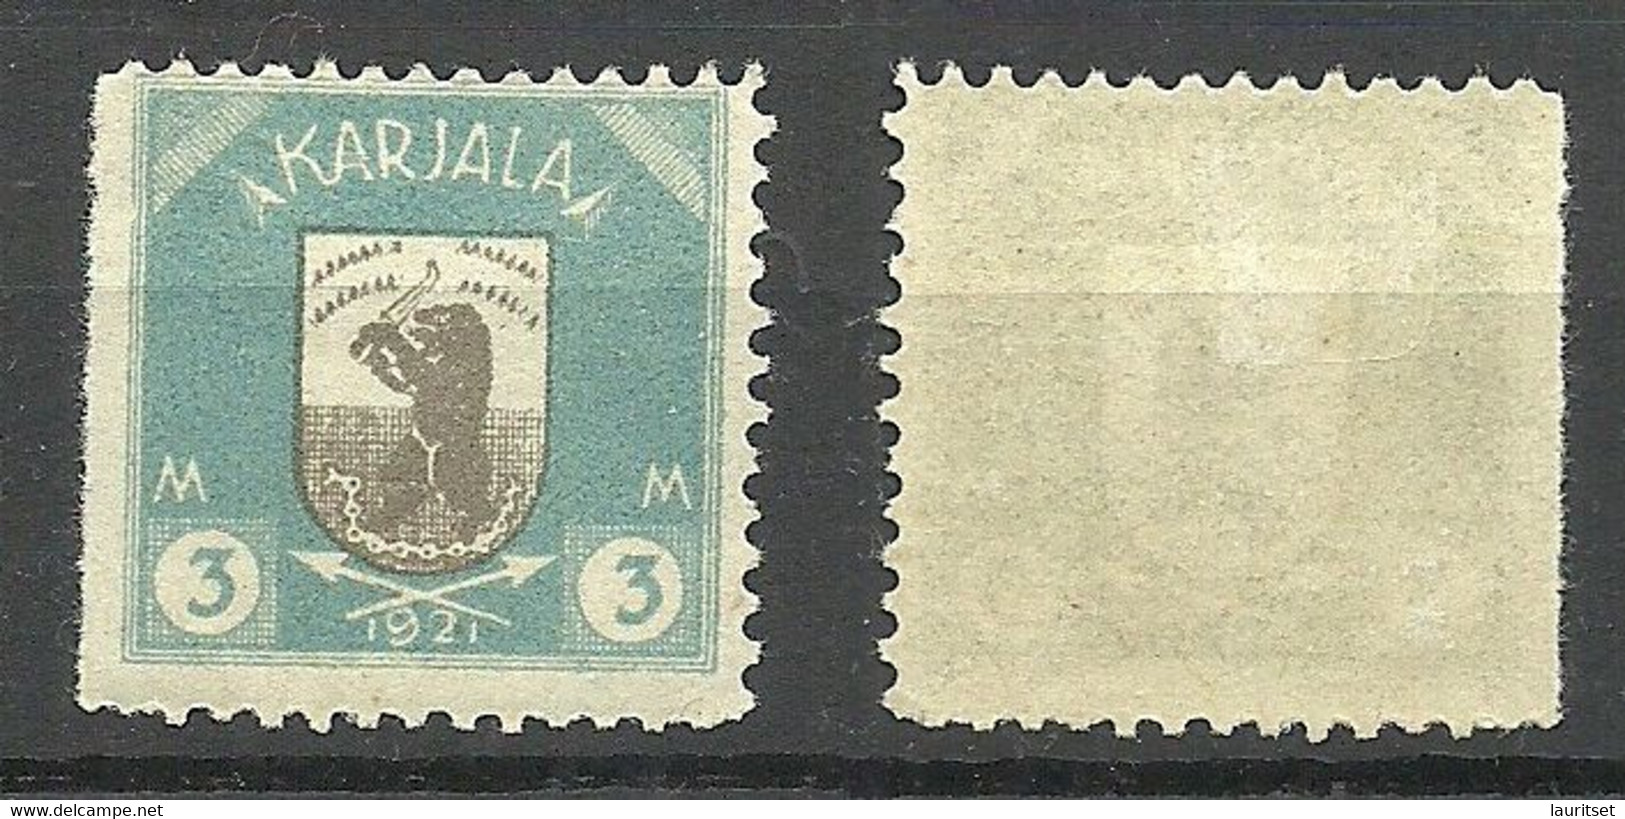 KARELIA Karelien FINLAND FINNLAND 1922 Michel 10 * NB! Variety Aart Left Side Seems To Be Imperforated! - Local Post Stamps